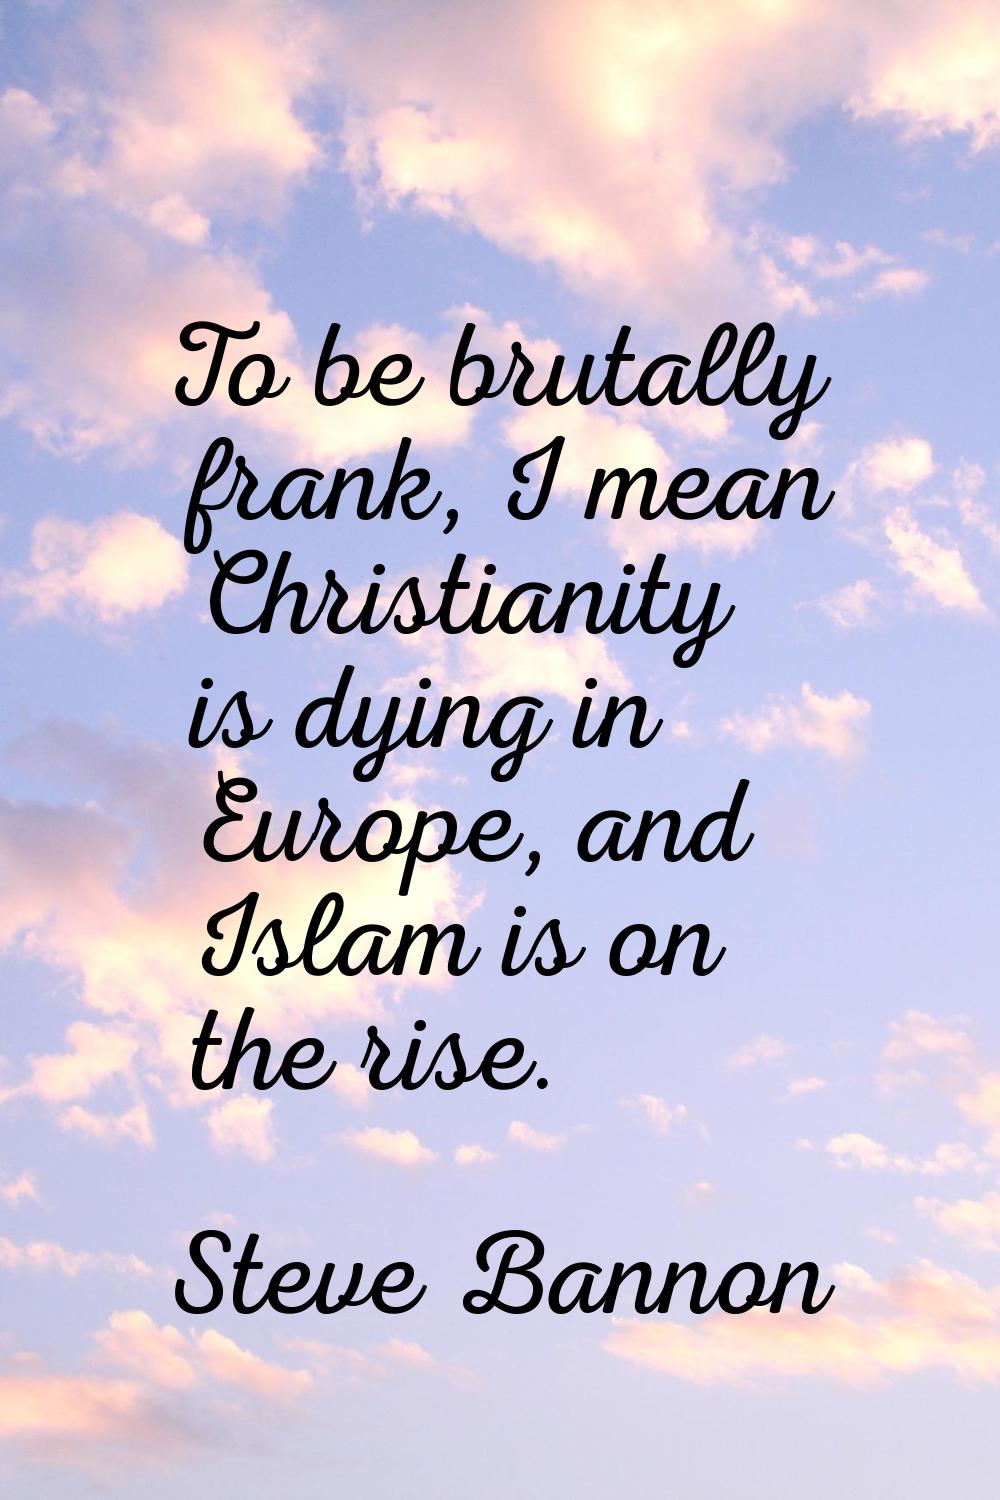 To be brutally frank, I mean Christianity is dying in Europe, and Islam is on the rise.